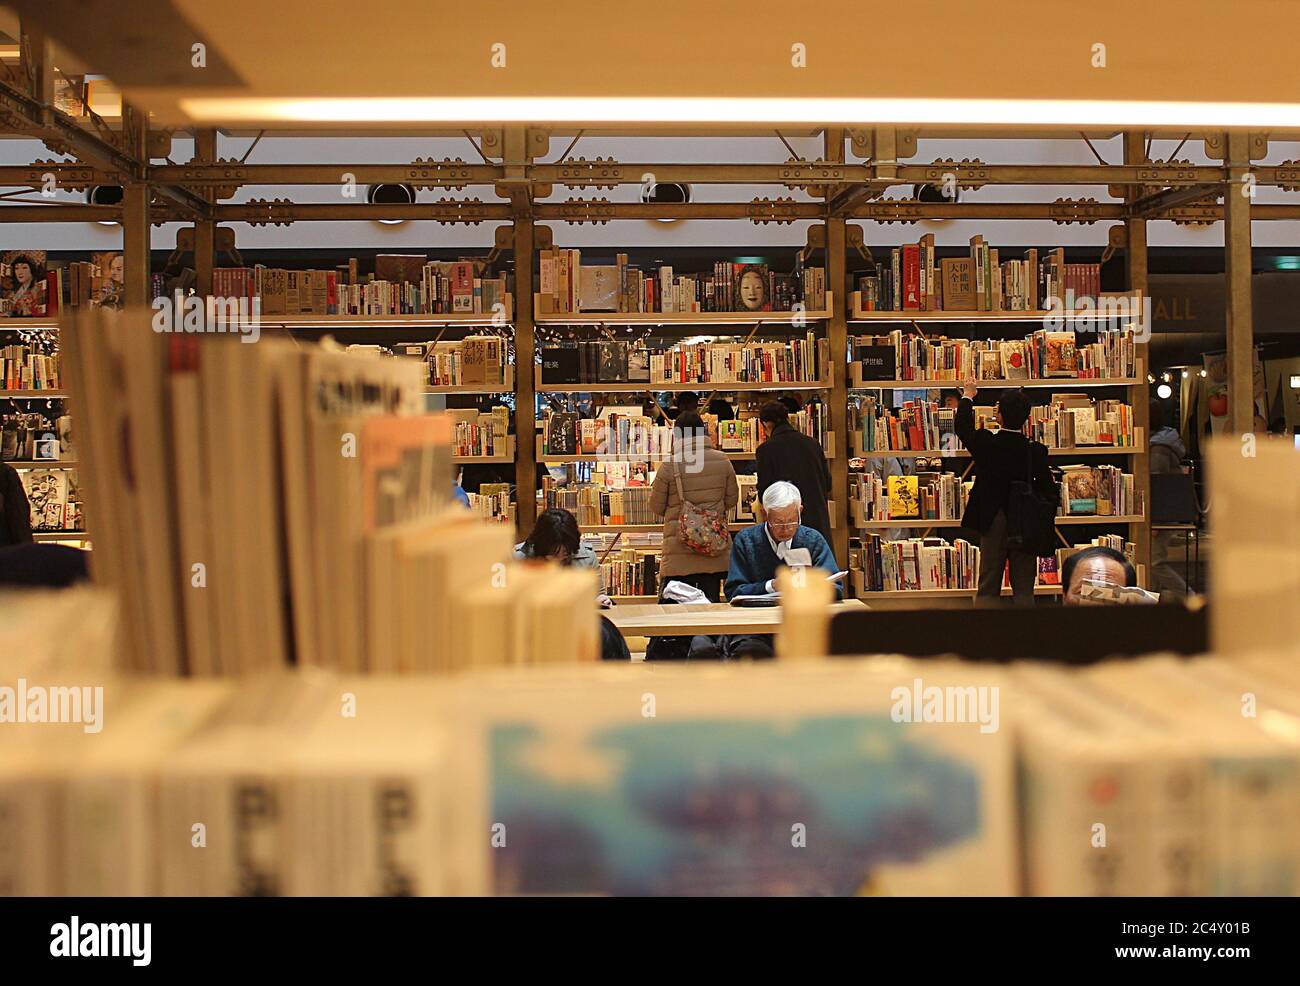 Tokyo, Japan: A Japanese bookstore with people browsing shelfs and sitting and reading. The scene is shot through book shelves with blurry covers. Stock Photo